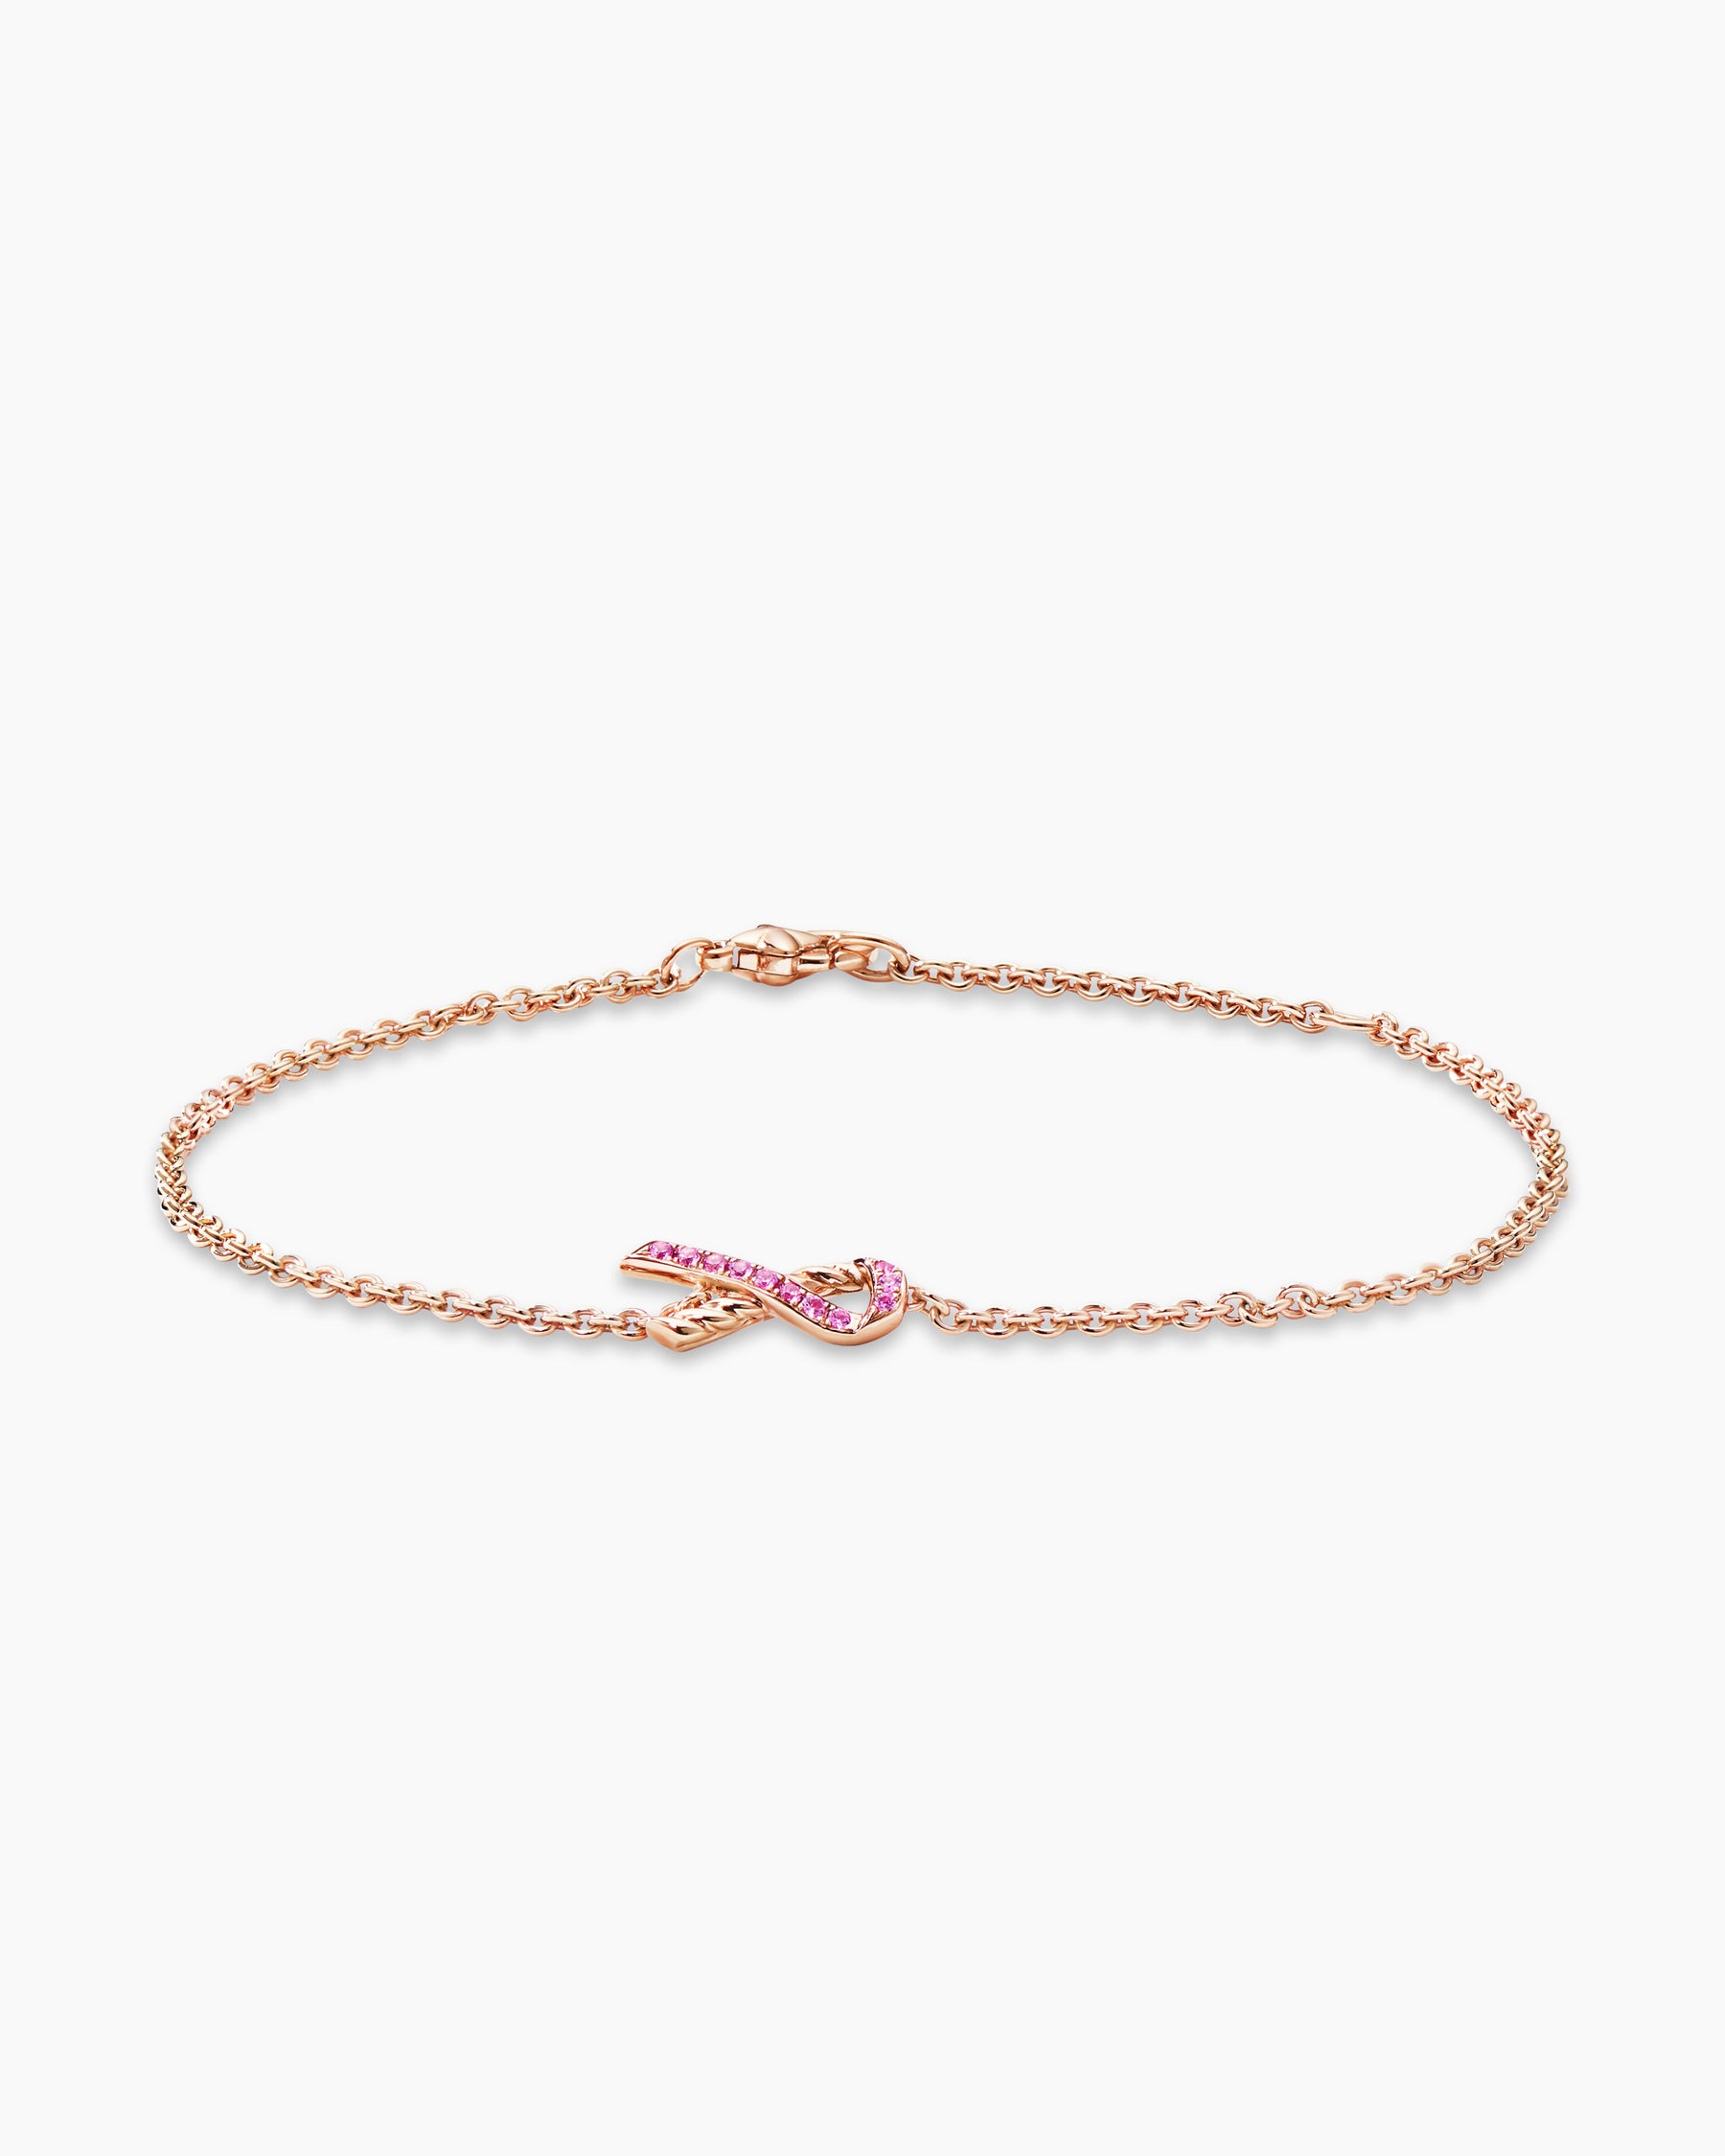 Cable Collectibles® Ribbon Chain Bracelet in Sterling Silver with Pavé Pink  Sapphires